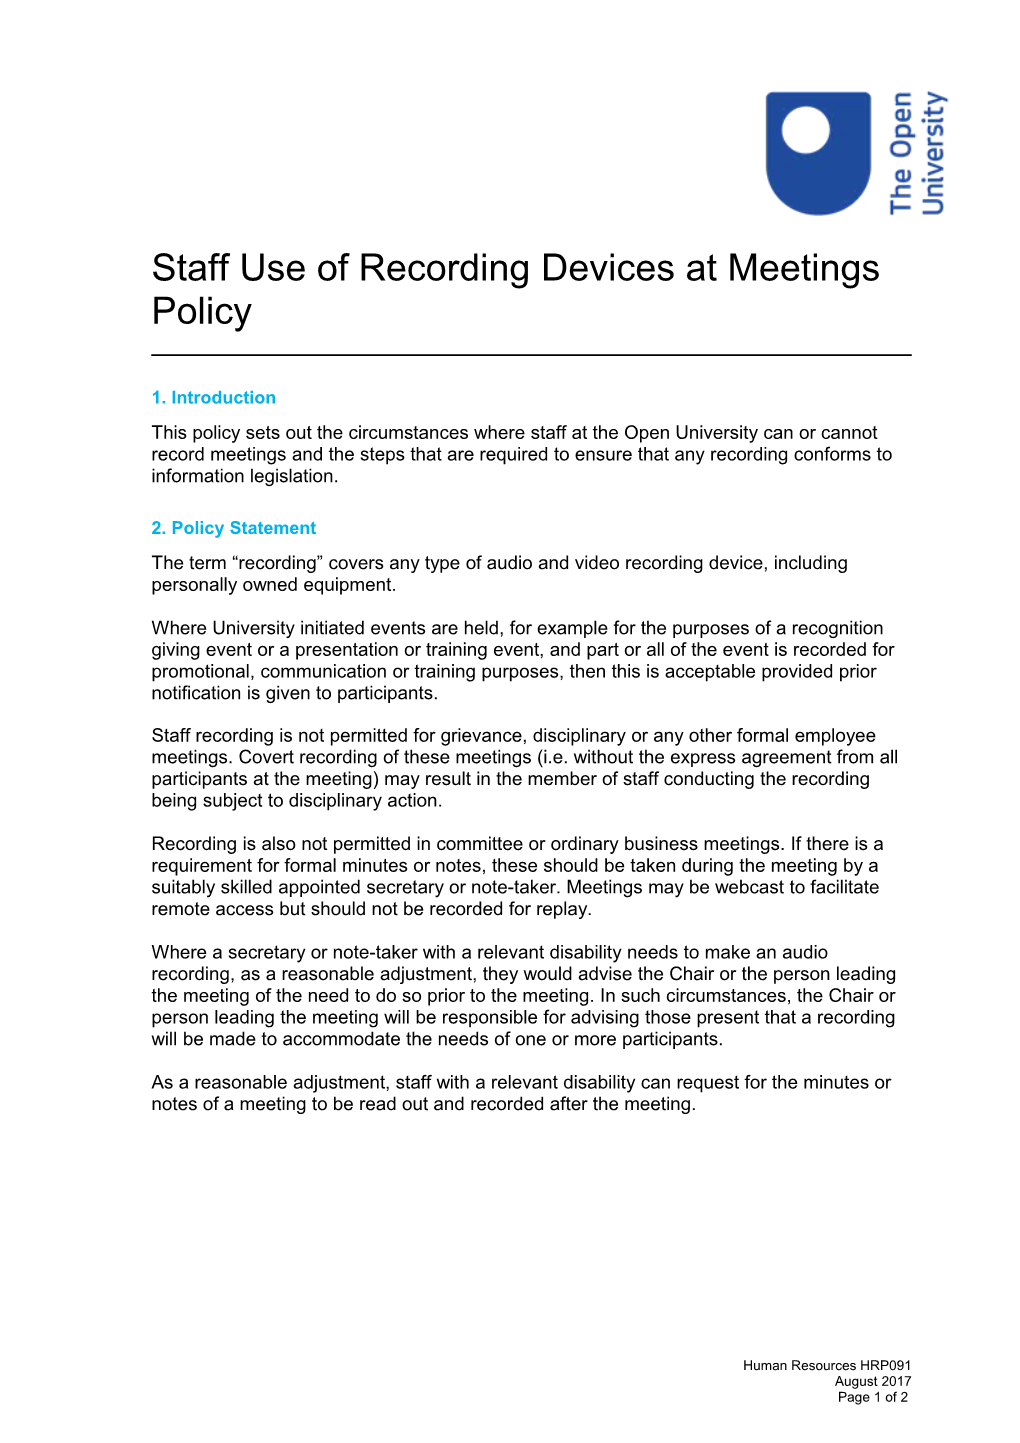 Use of Recording Devices Policy HRP041